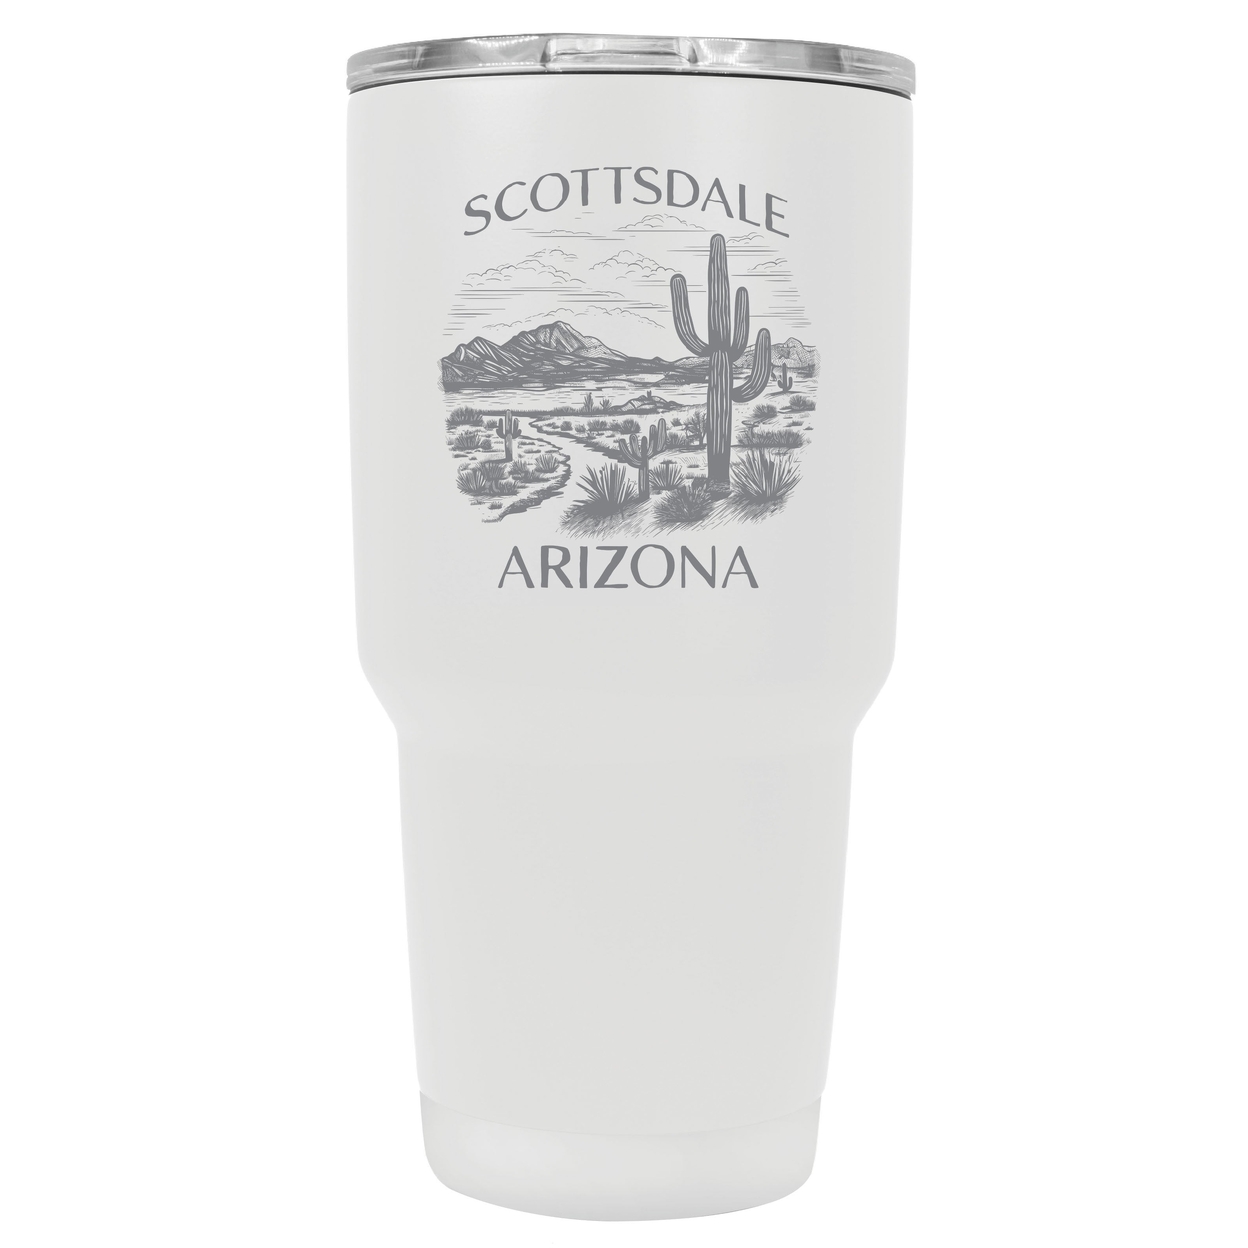 Scottsdale Arizona Souvenir 24 Oz Engraved Insulated Stainless Steel Tumbler - Green,,4-Pack